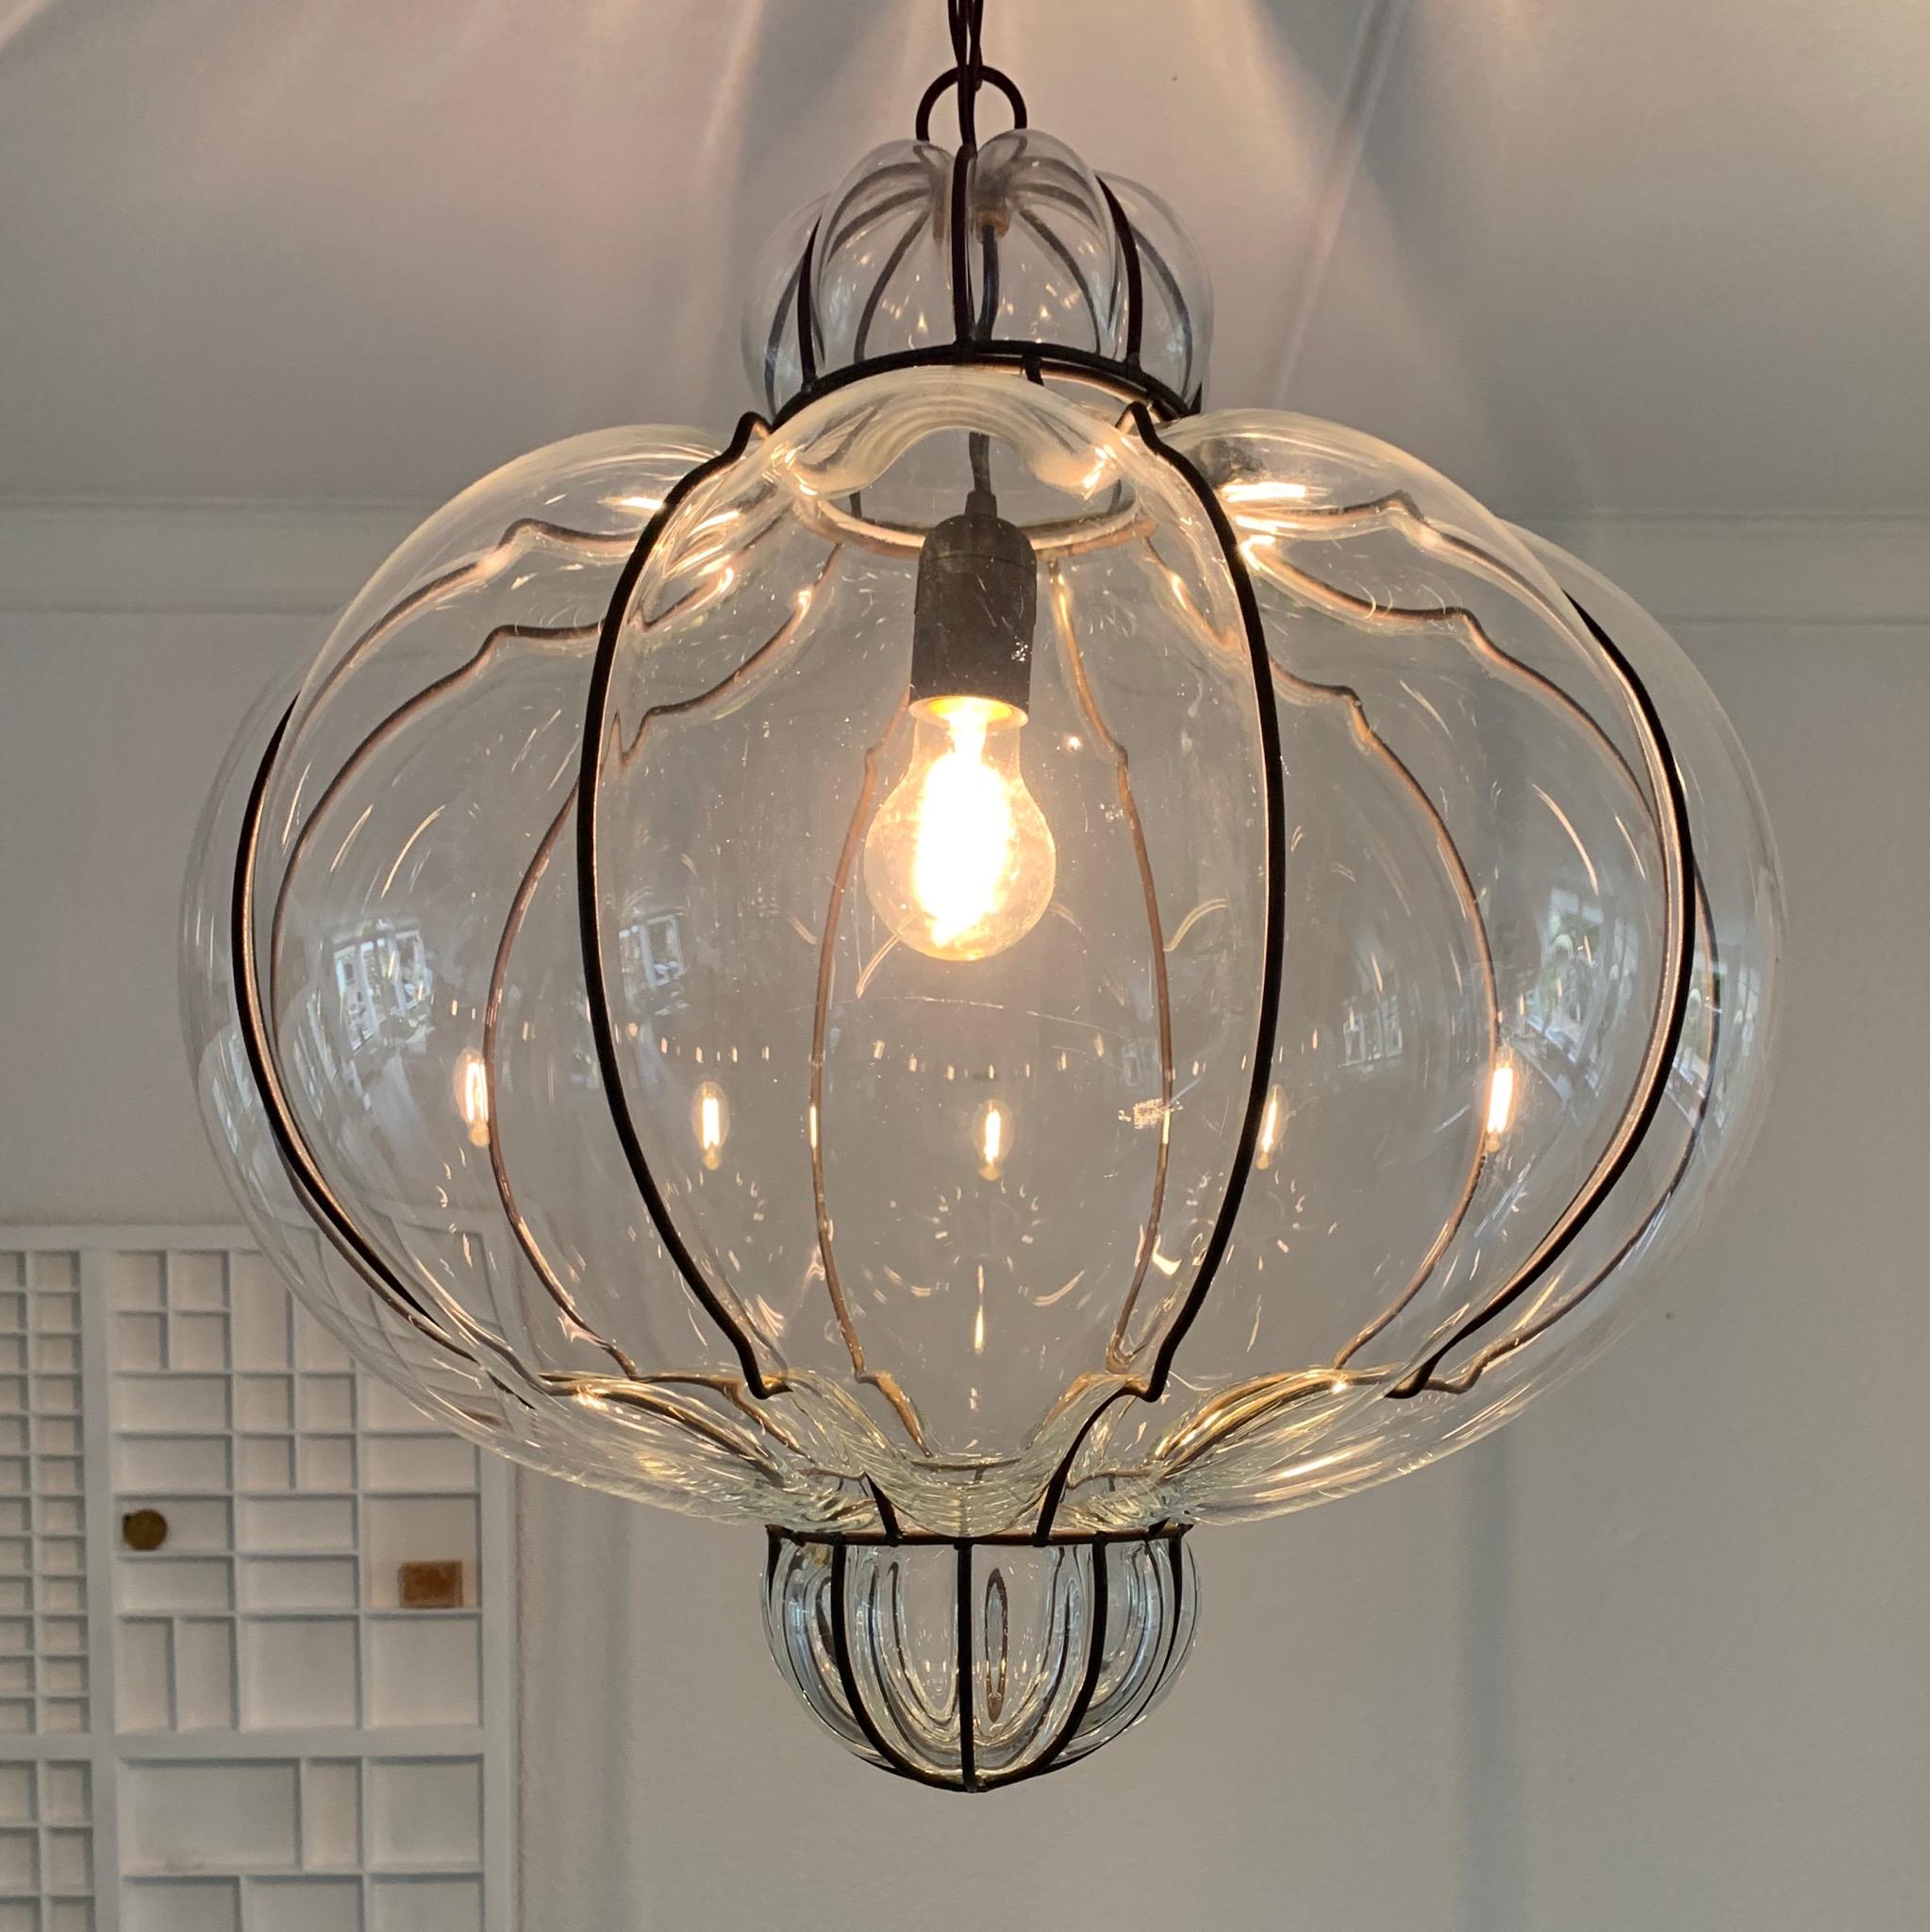 Stunning Midcentury made Italian transparent light fixture.

This fine quality workmanship pendant from mid-20th century Italy is another one of our recent great finds. Only three weeks ago did we come across his twin brother (jn terms of size and